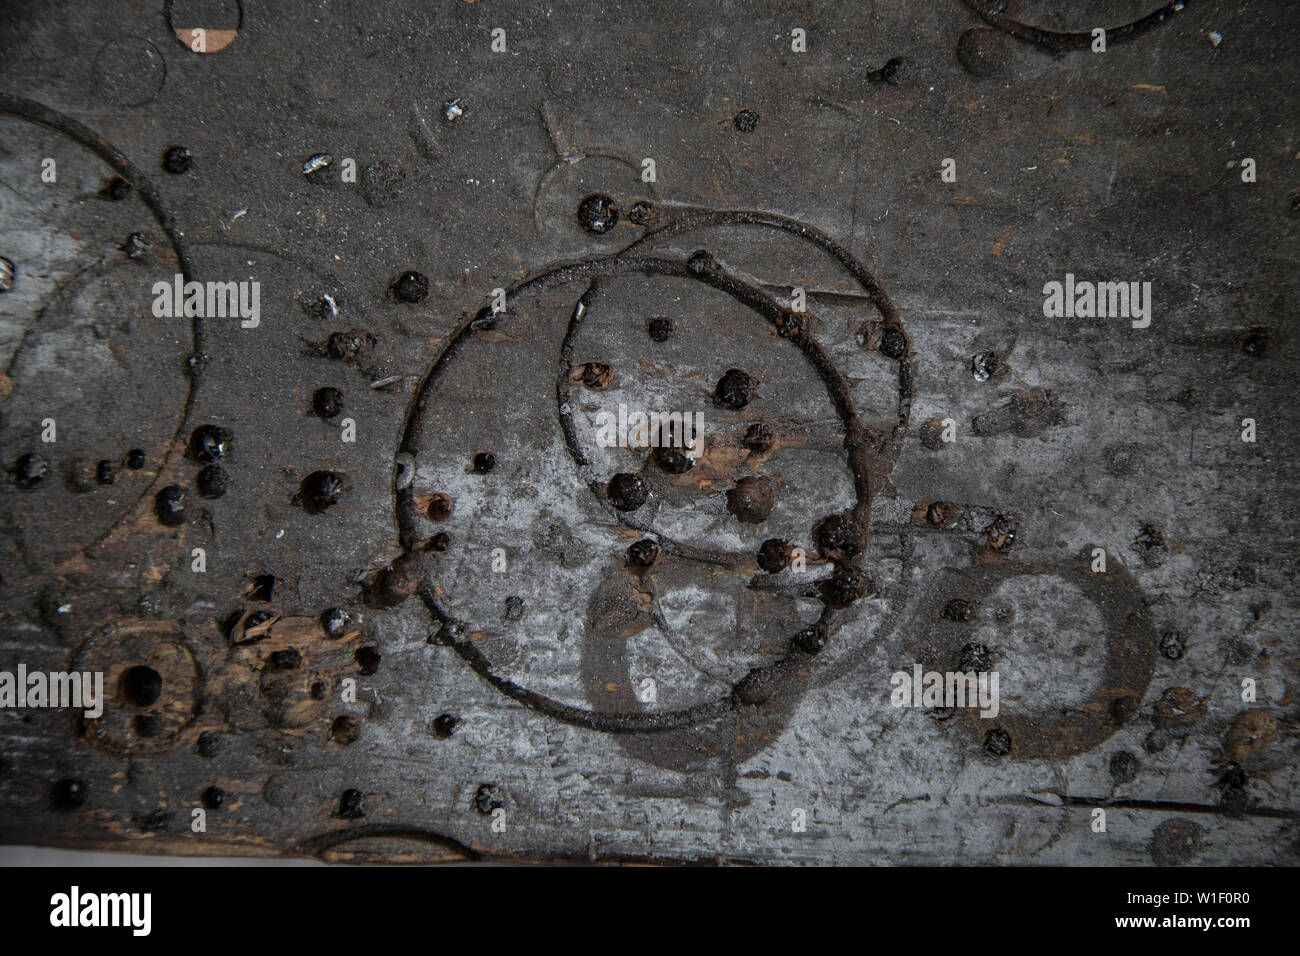 Workbench metal surface close up Stock Photo